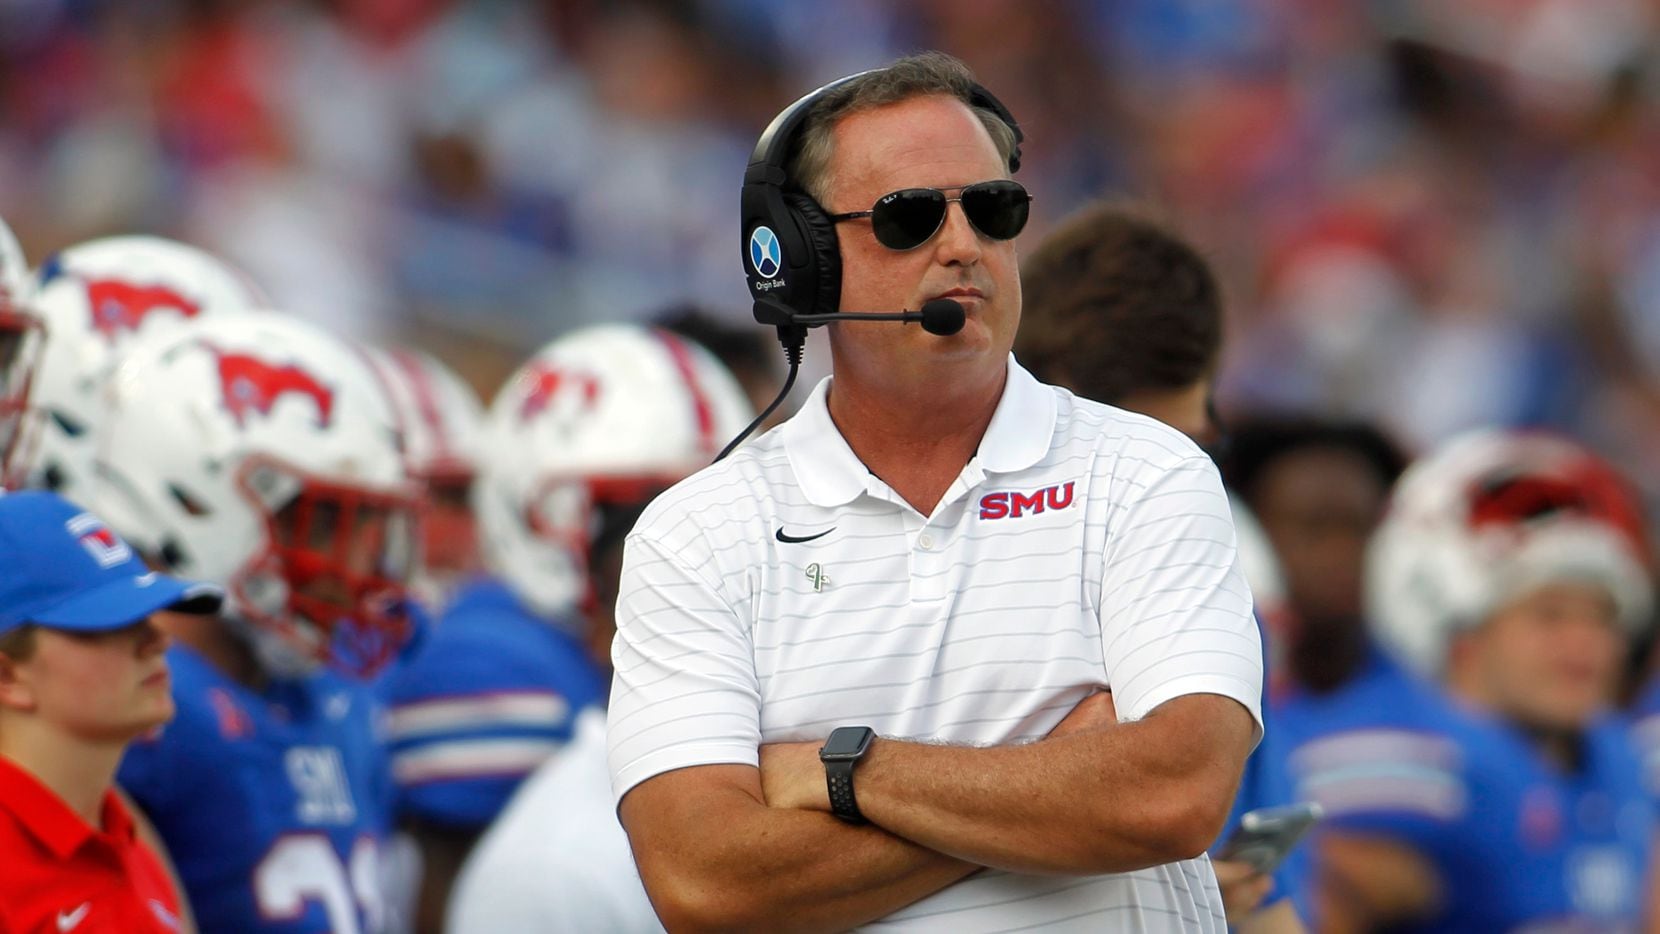 SMU head coach Sonny Dykes looks on from the team bench area during first half action against South Florida. The two teams played their NCAA football game at SMU's Ford Stadium in Dallas on October 2, 2021.